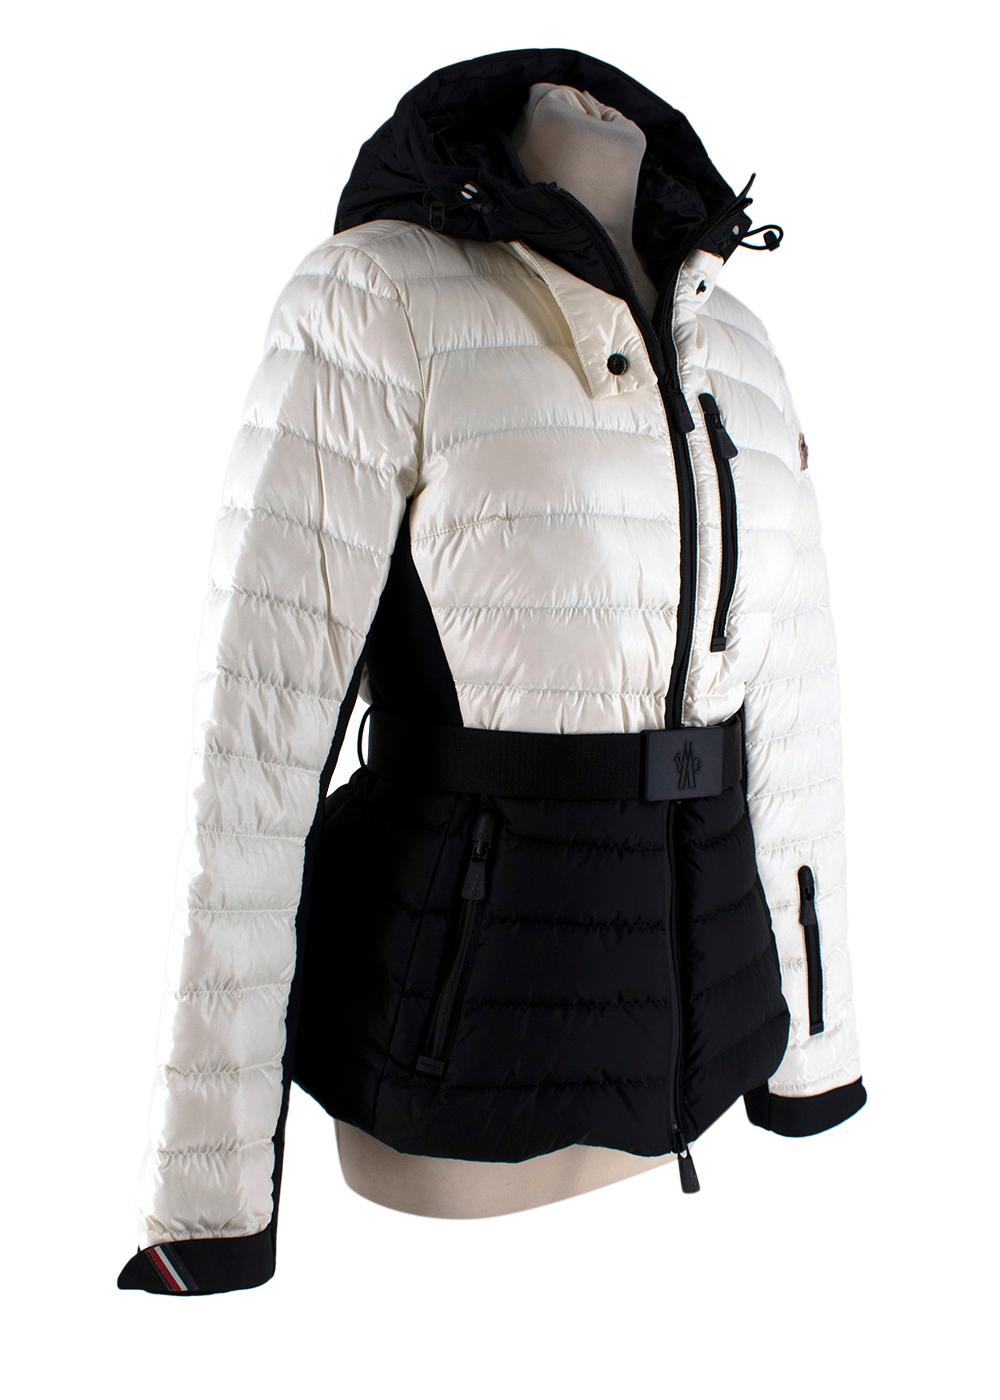 Moncler Grenoble Black & White Bruche Padded Jacket

- Sleek quilted lightweight jacket
- Perfect for use on or off the slopes
- Hooded, zip through with adjustable waistbelt
- Inset zipped front and arm pockets
- Fully lined 

Materials 
100% Nylon